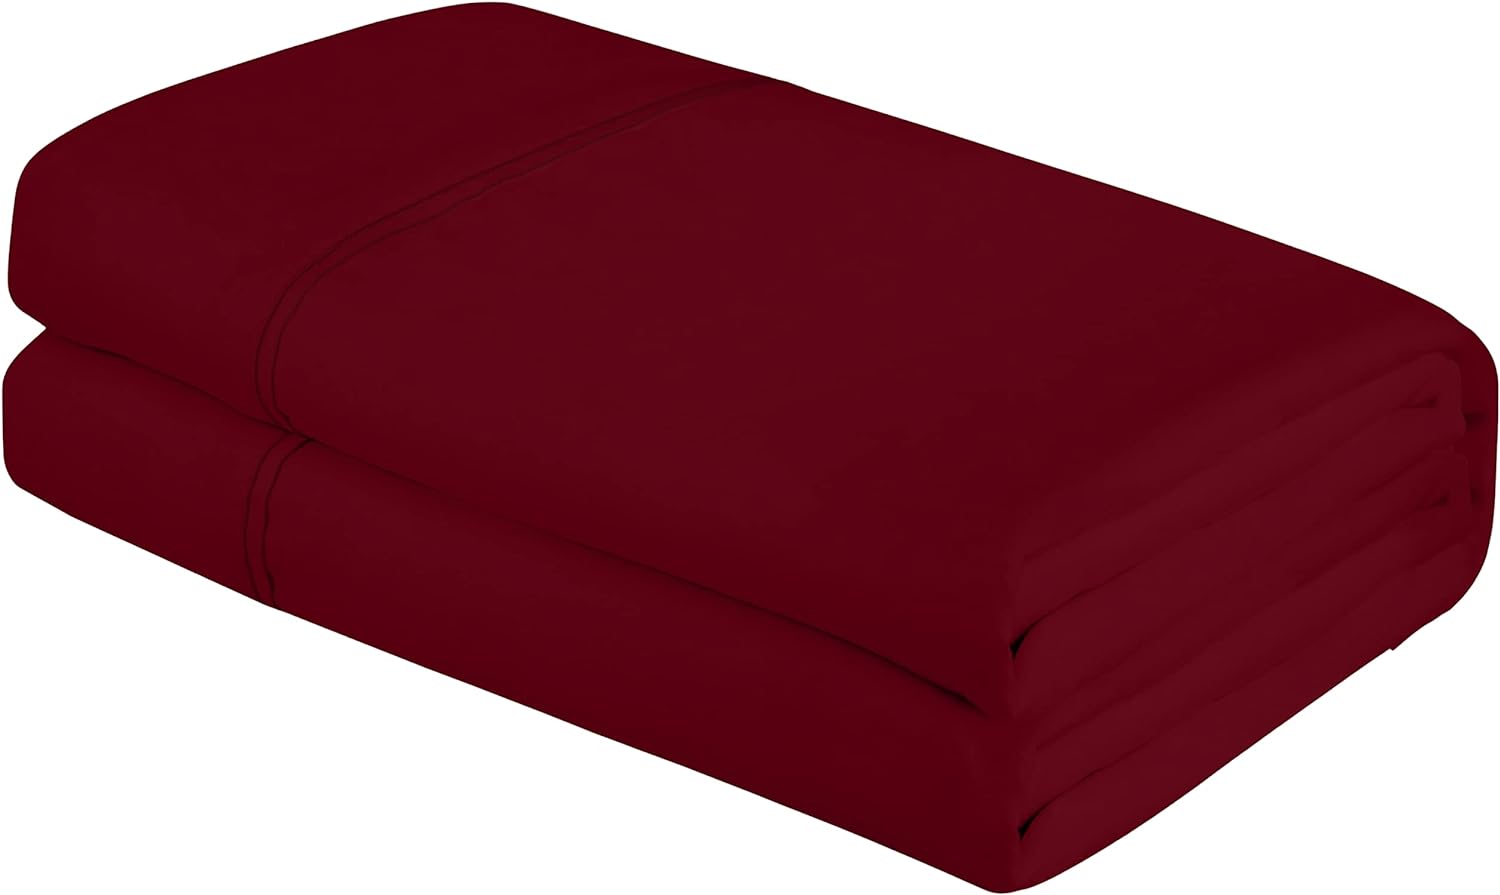 Royale Linens King Size Flat Sheet Only - Brushed 1800 Microfiber - Ultra Soft & Breathable - Wrinkle & Stain Resistant - Hotel Quality Flat Sheet Sold Separately - Top Sheet For Bed - (King,Burgundy)